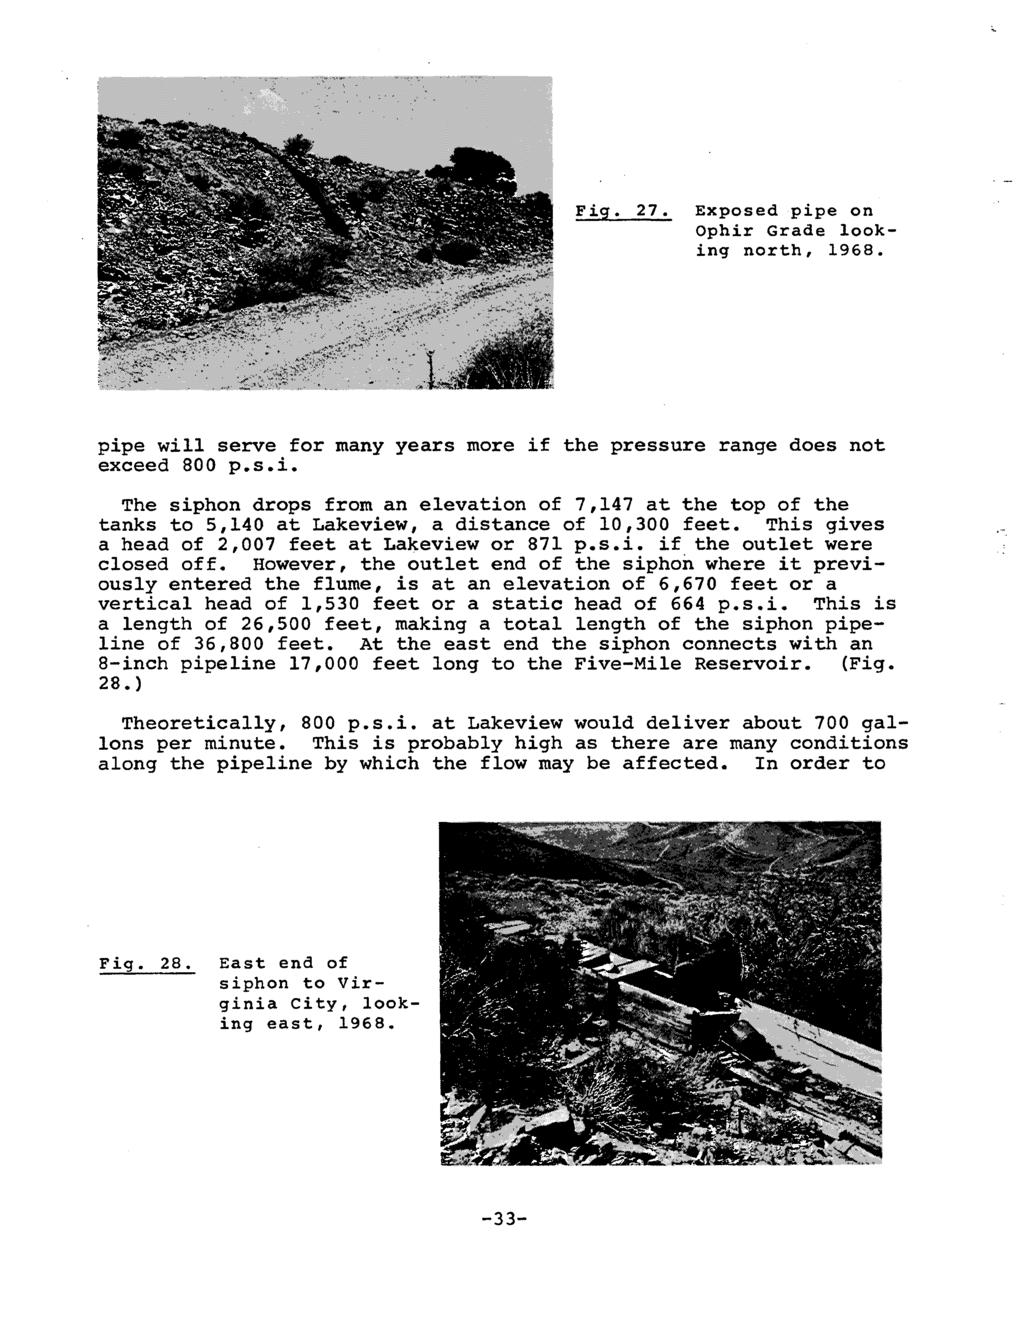 Fig. 27. Exposed pipe on Ophir Grade looking north, 1968. pipe will serve for many years more if the pressure range does not exceed 800 p.s.i. The siphon drops from an elevation of 7,147 at the top of the tanks to 5,140 at Lakeview, a distance of 10,300 feet.